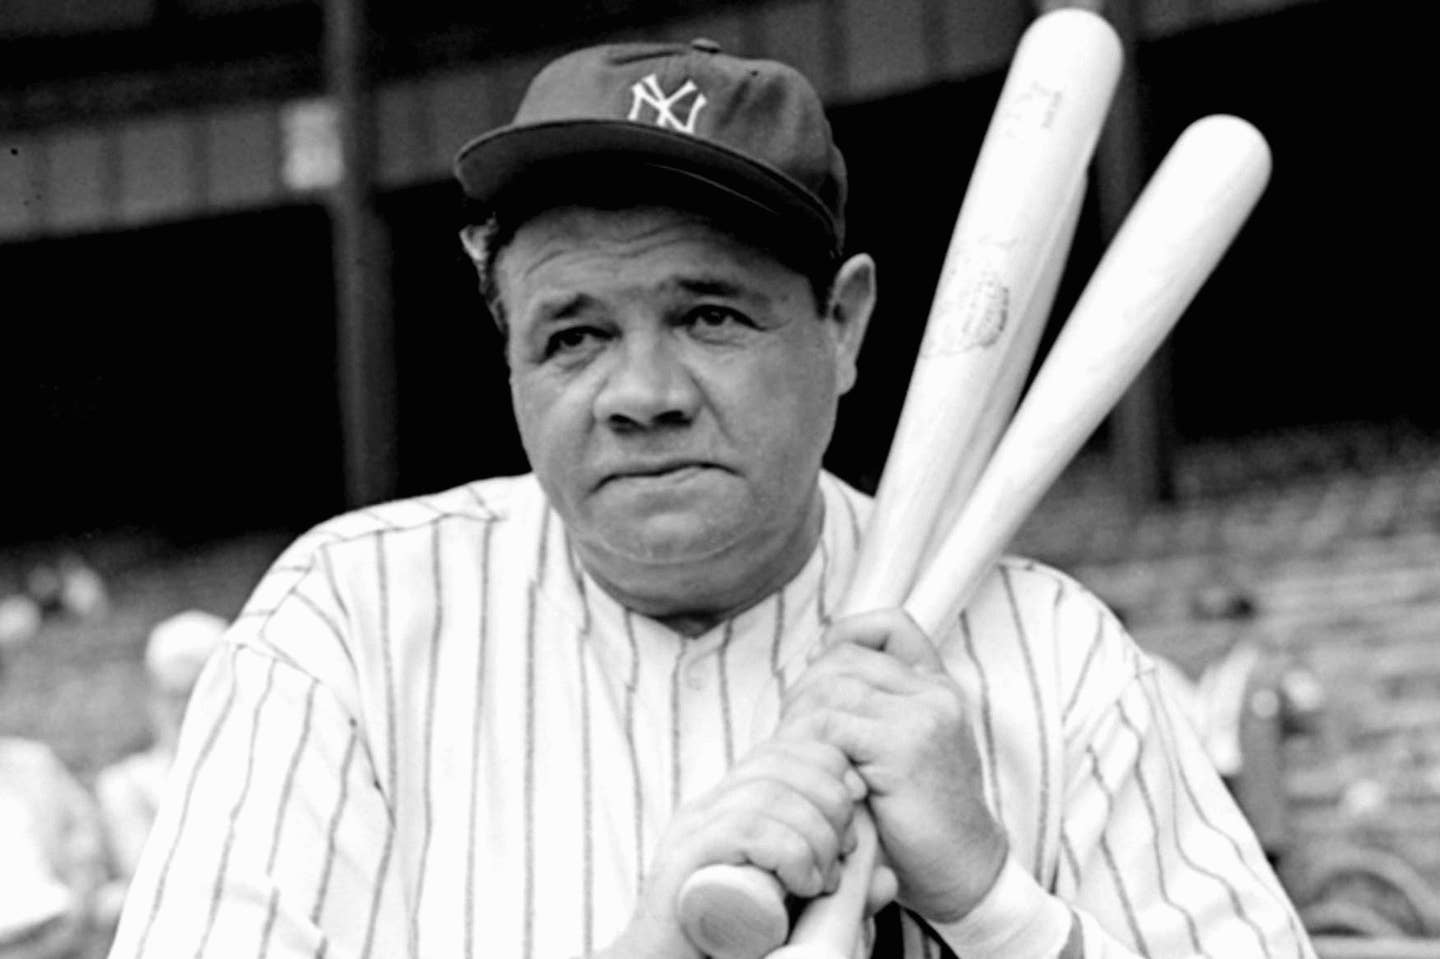 babe ruth is among the best baseball players who also served